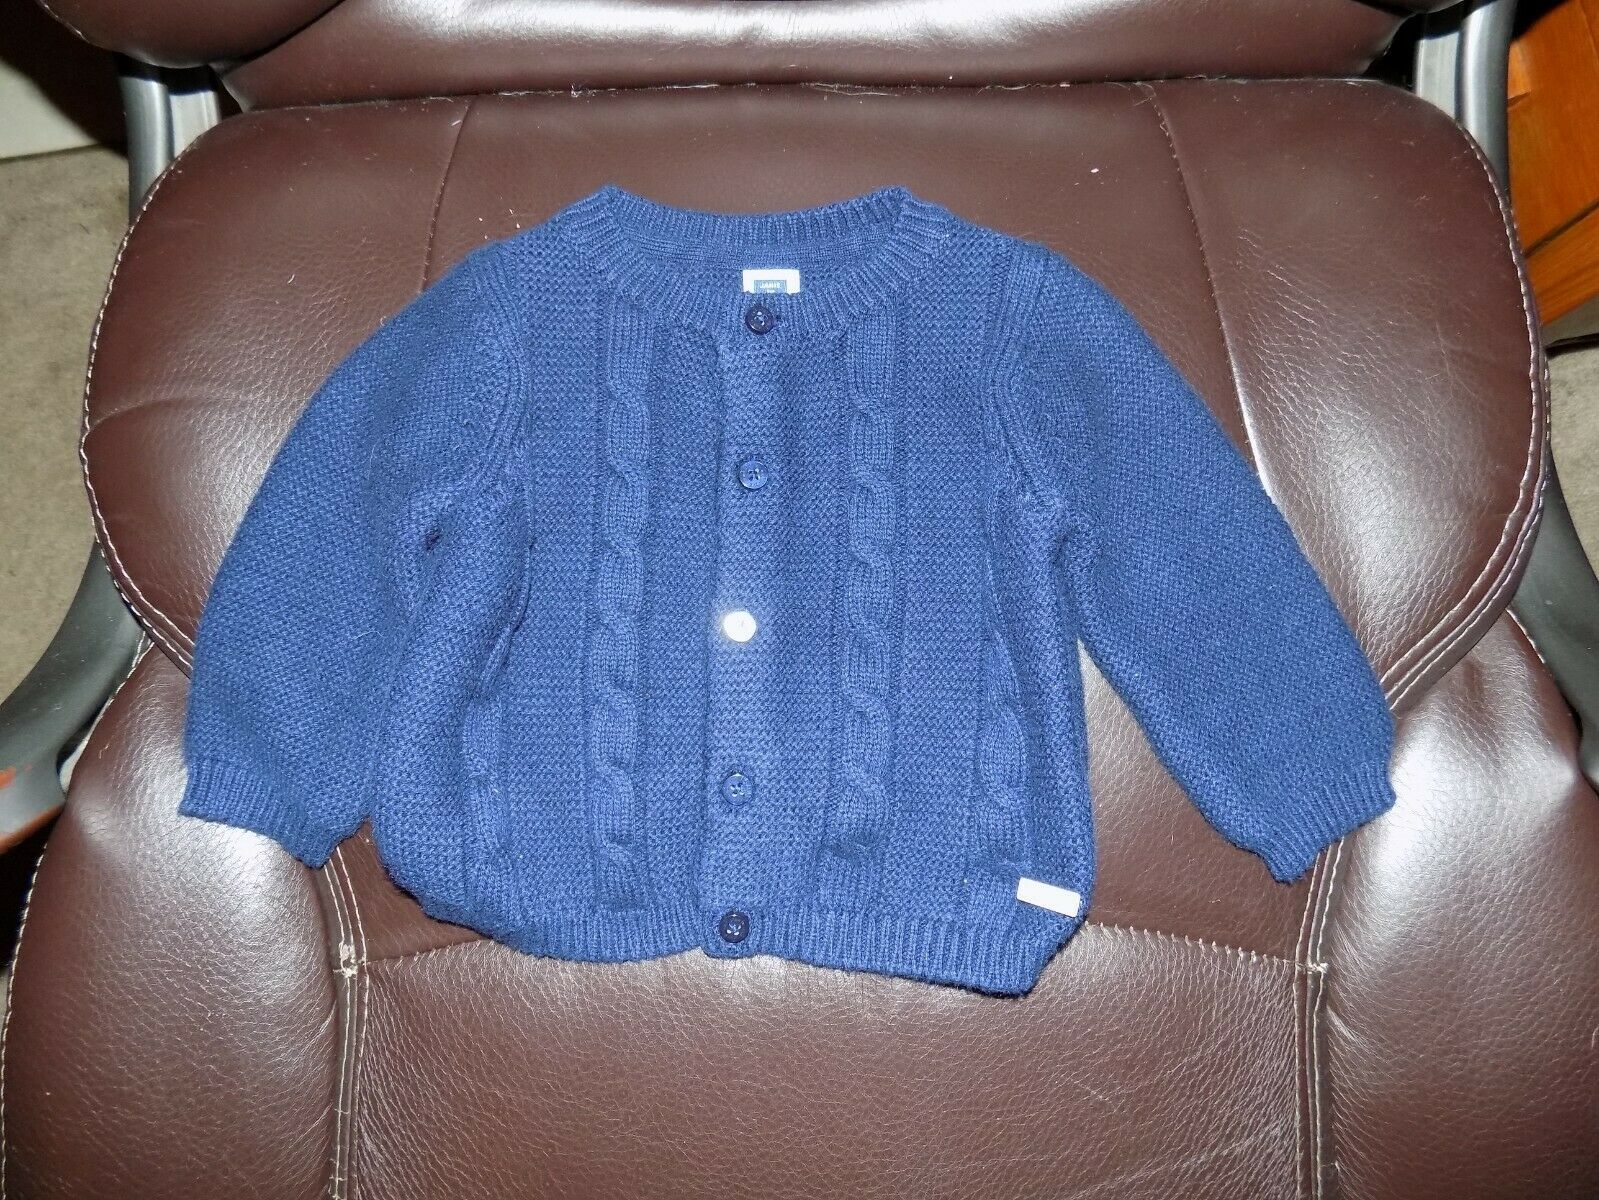 Primary image for Janie and Jack Signature Layette Navy Cable Knit Cardigan Sweater Size 3/6 Month